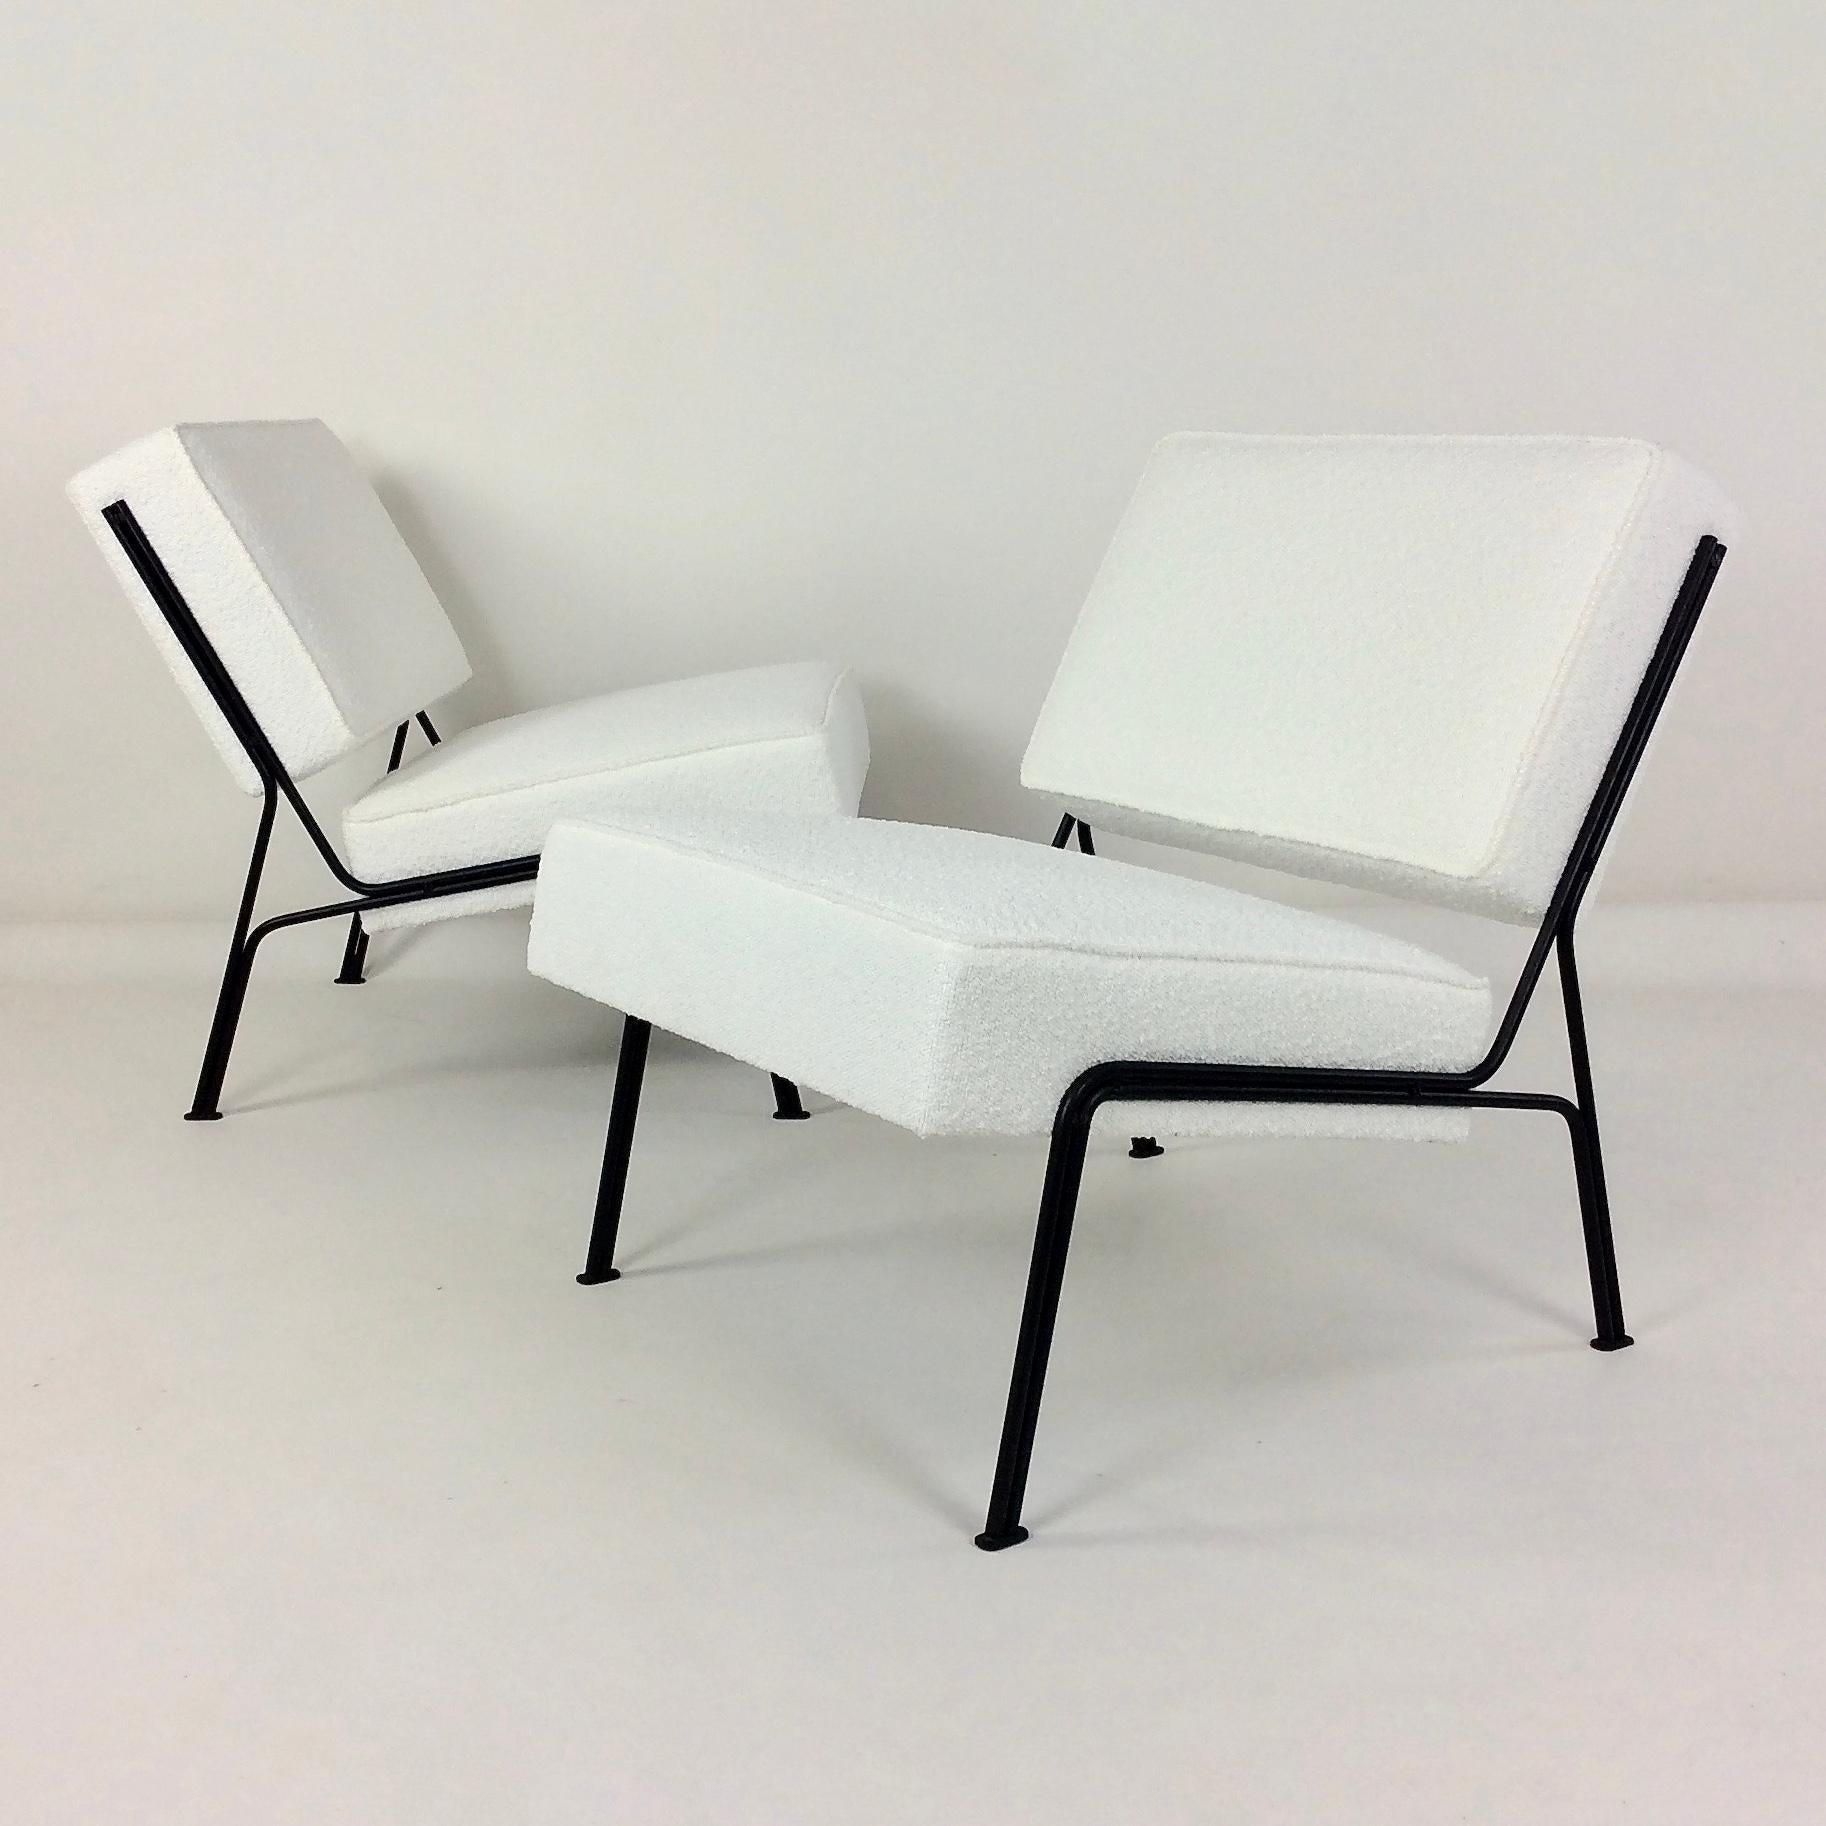 Pair of G2 Chairs By A.R.P. Guariche, Motte, Mortier for Airborne, 1953, France. For Sale 8